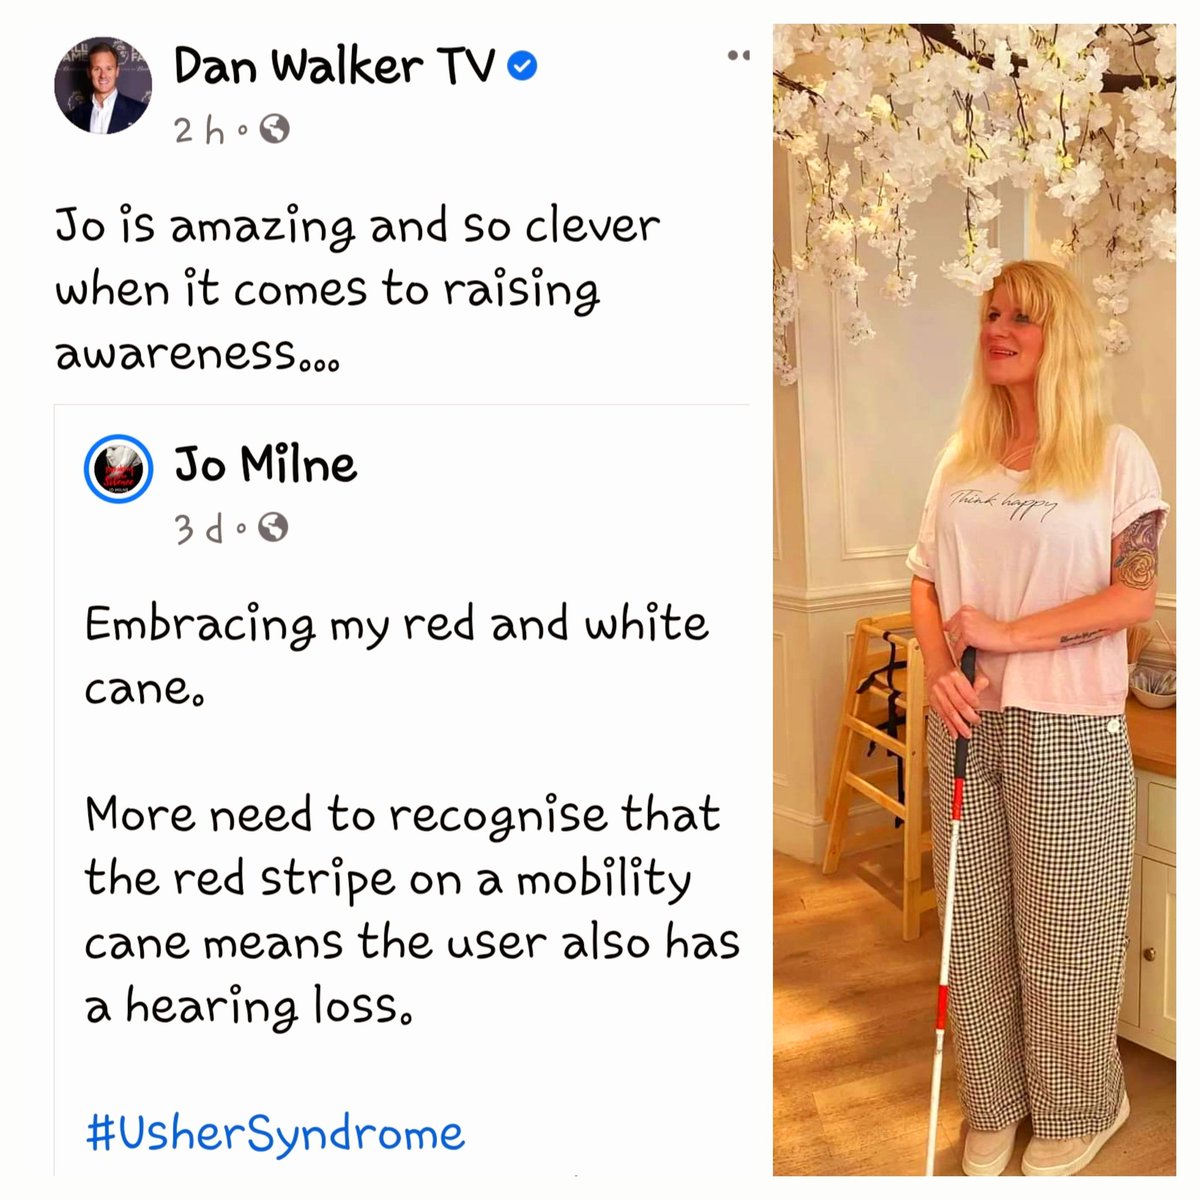 THANK YOU to @mrdanwalker for helping spread awareness. Fact: a red stripe on a person's mobility cane means they have a hearing loss too - this also applies to a guide dog's red and white chequered harness #Awareness #UsherSyndrome #MyRedStripes #CureUsher #DualSensoryLoss